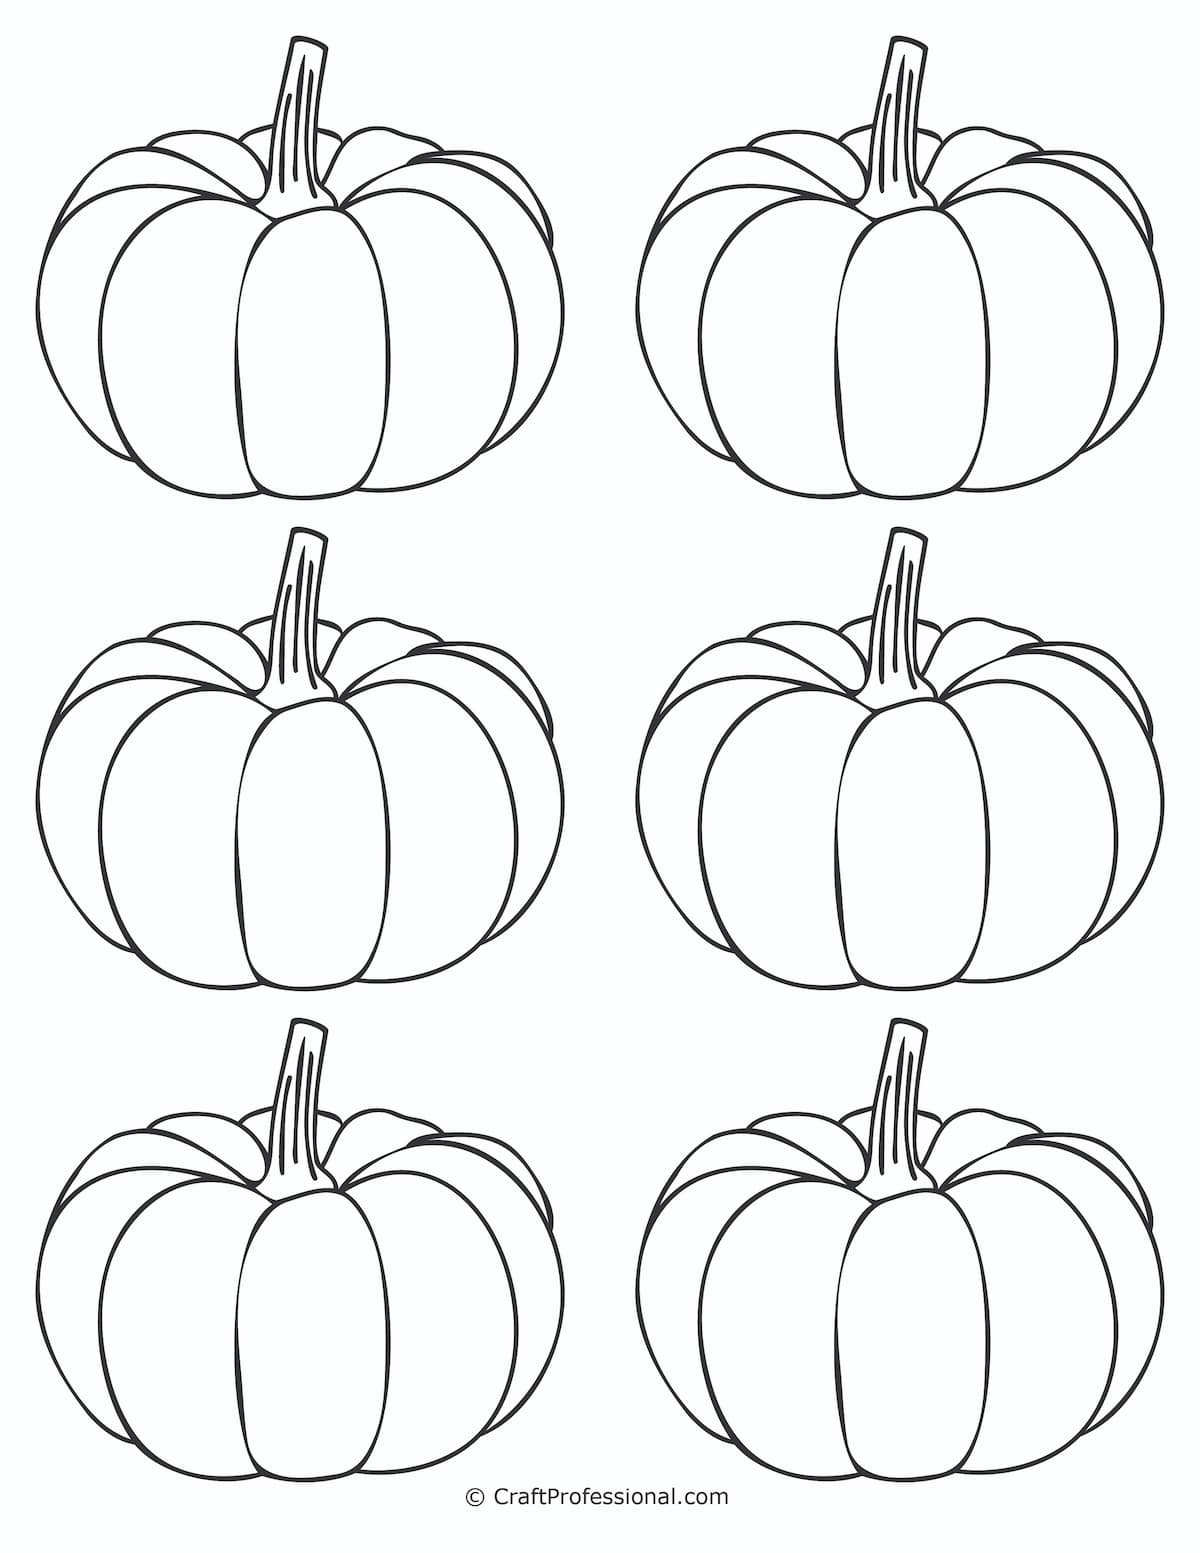 Pumpkin Coloring Pages For Kids To Print